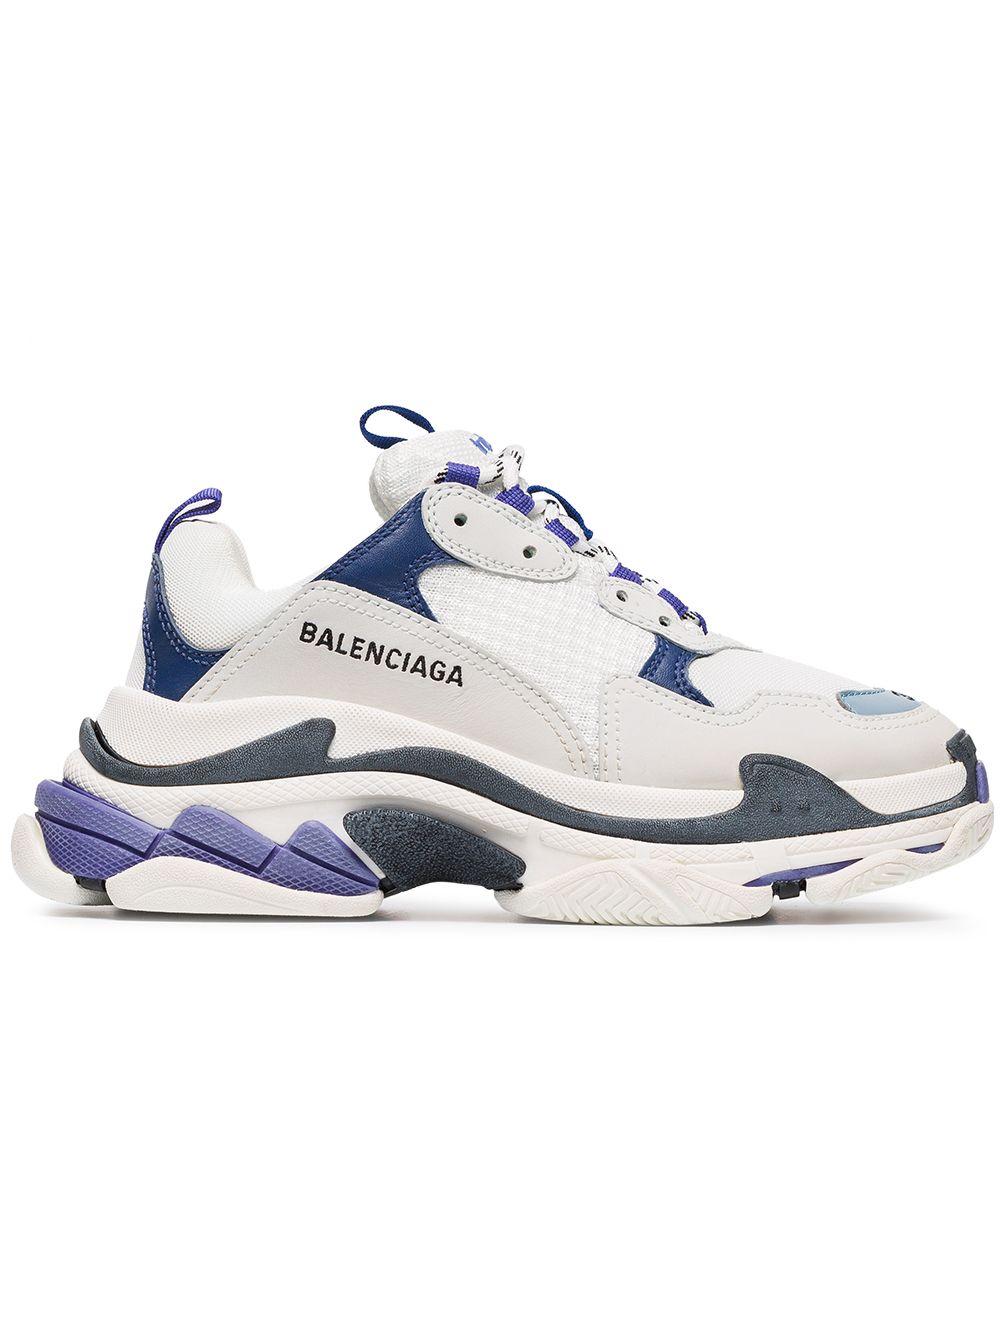 Balenciaga White And Blue Triple S Leather Sneakers | Lyst Canada